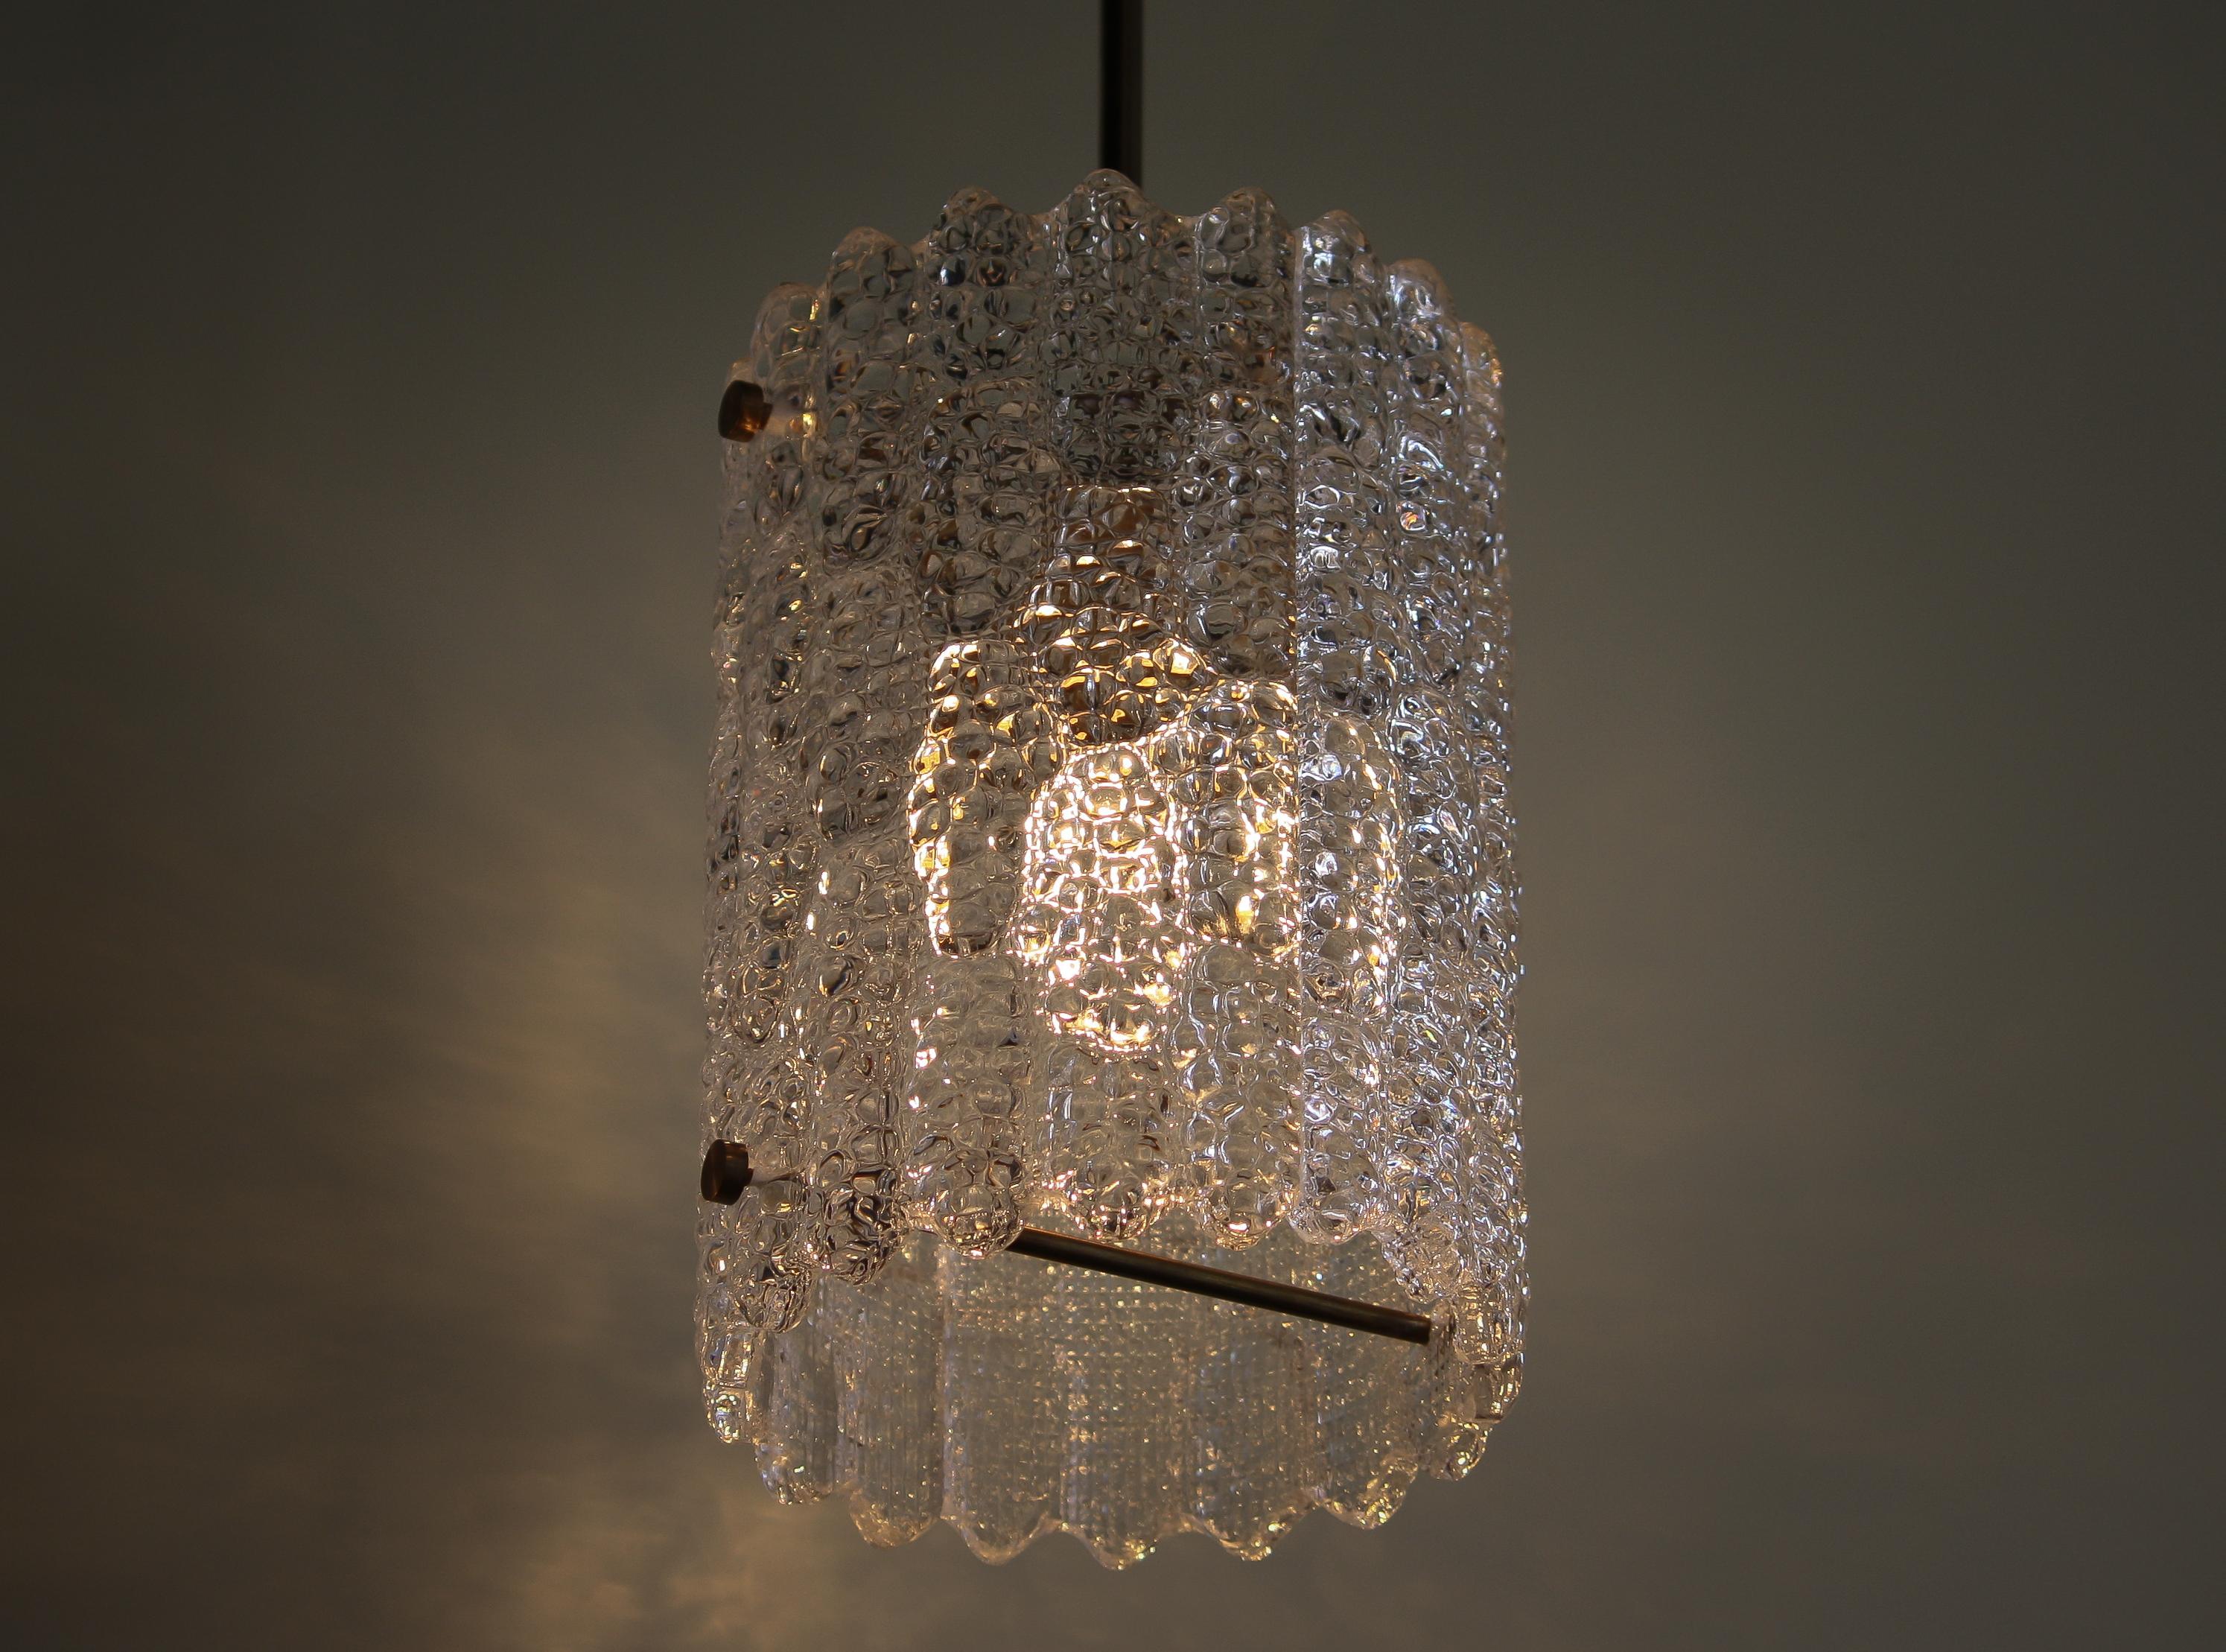 Beautiful pendant designed by Carl Fagerlund for Orrefors, Sweden.
This lamp is made of brass with crystal glass and is in a very nice condition.
The textured glass reflects a wonderful light.
Period 1960s.
Dimensions: H 25 cm, ø 18 cm.